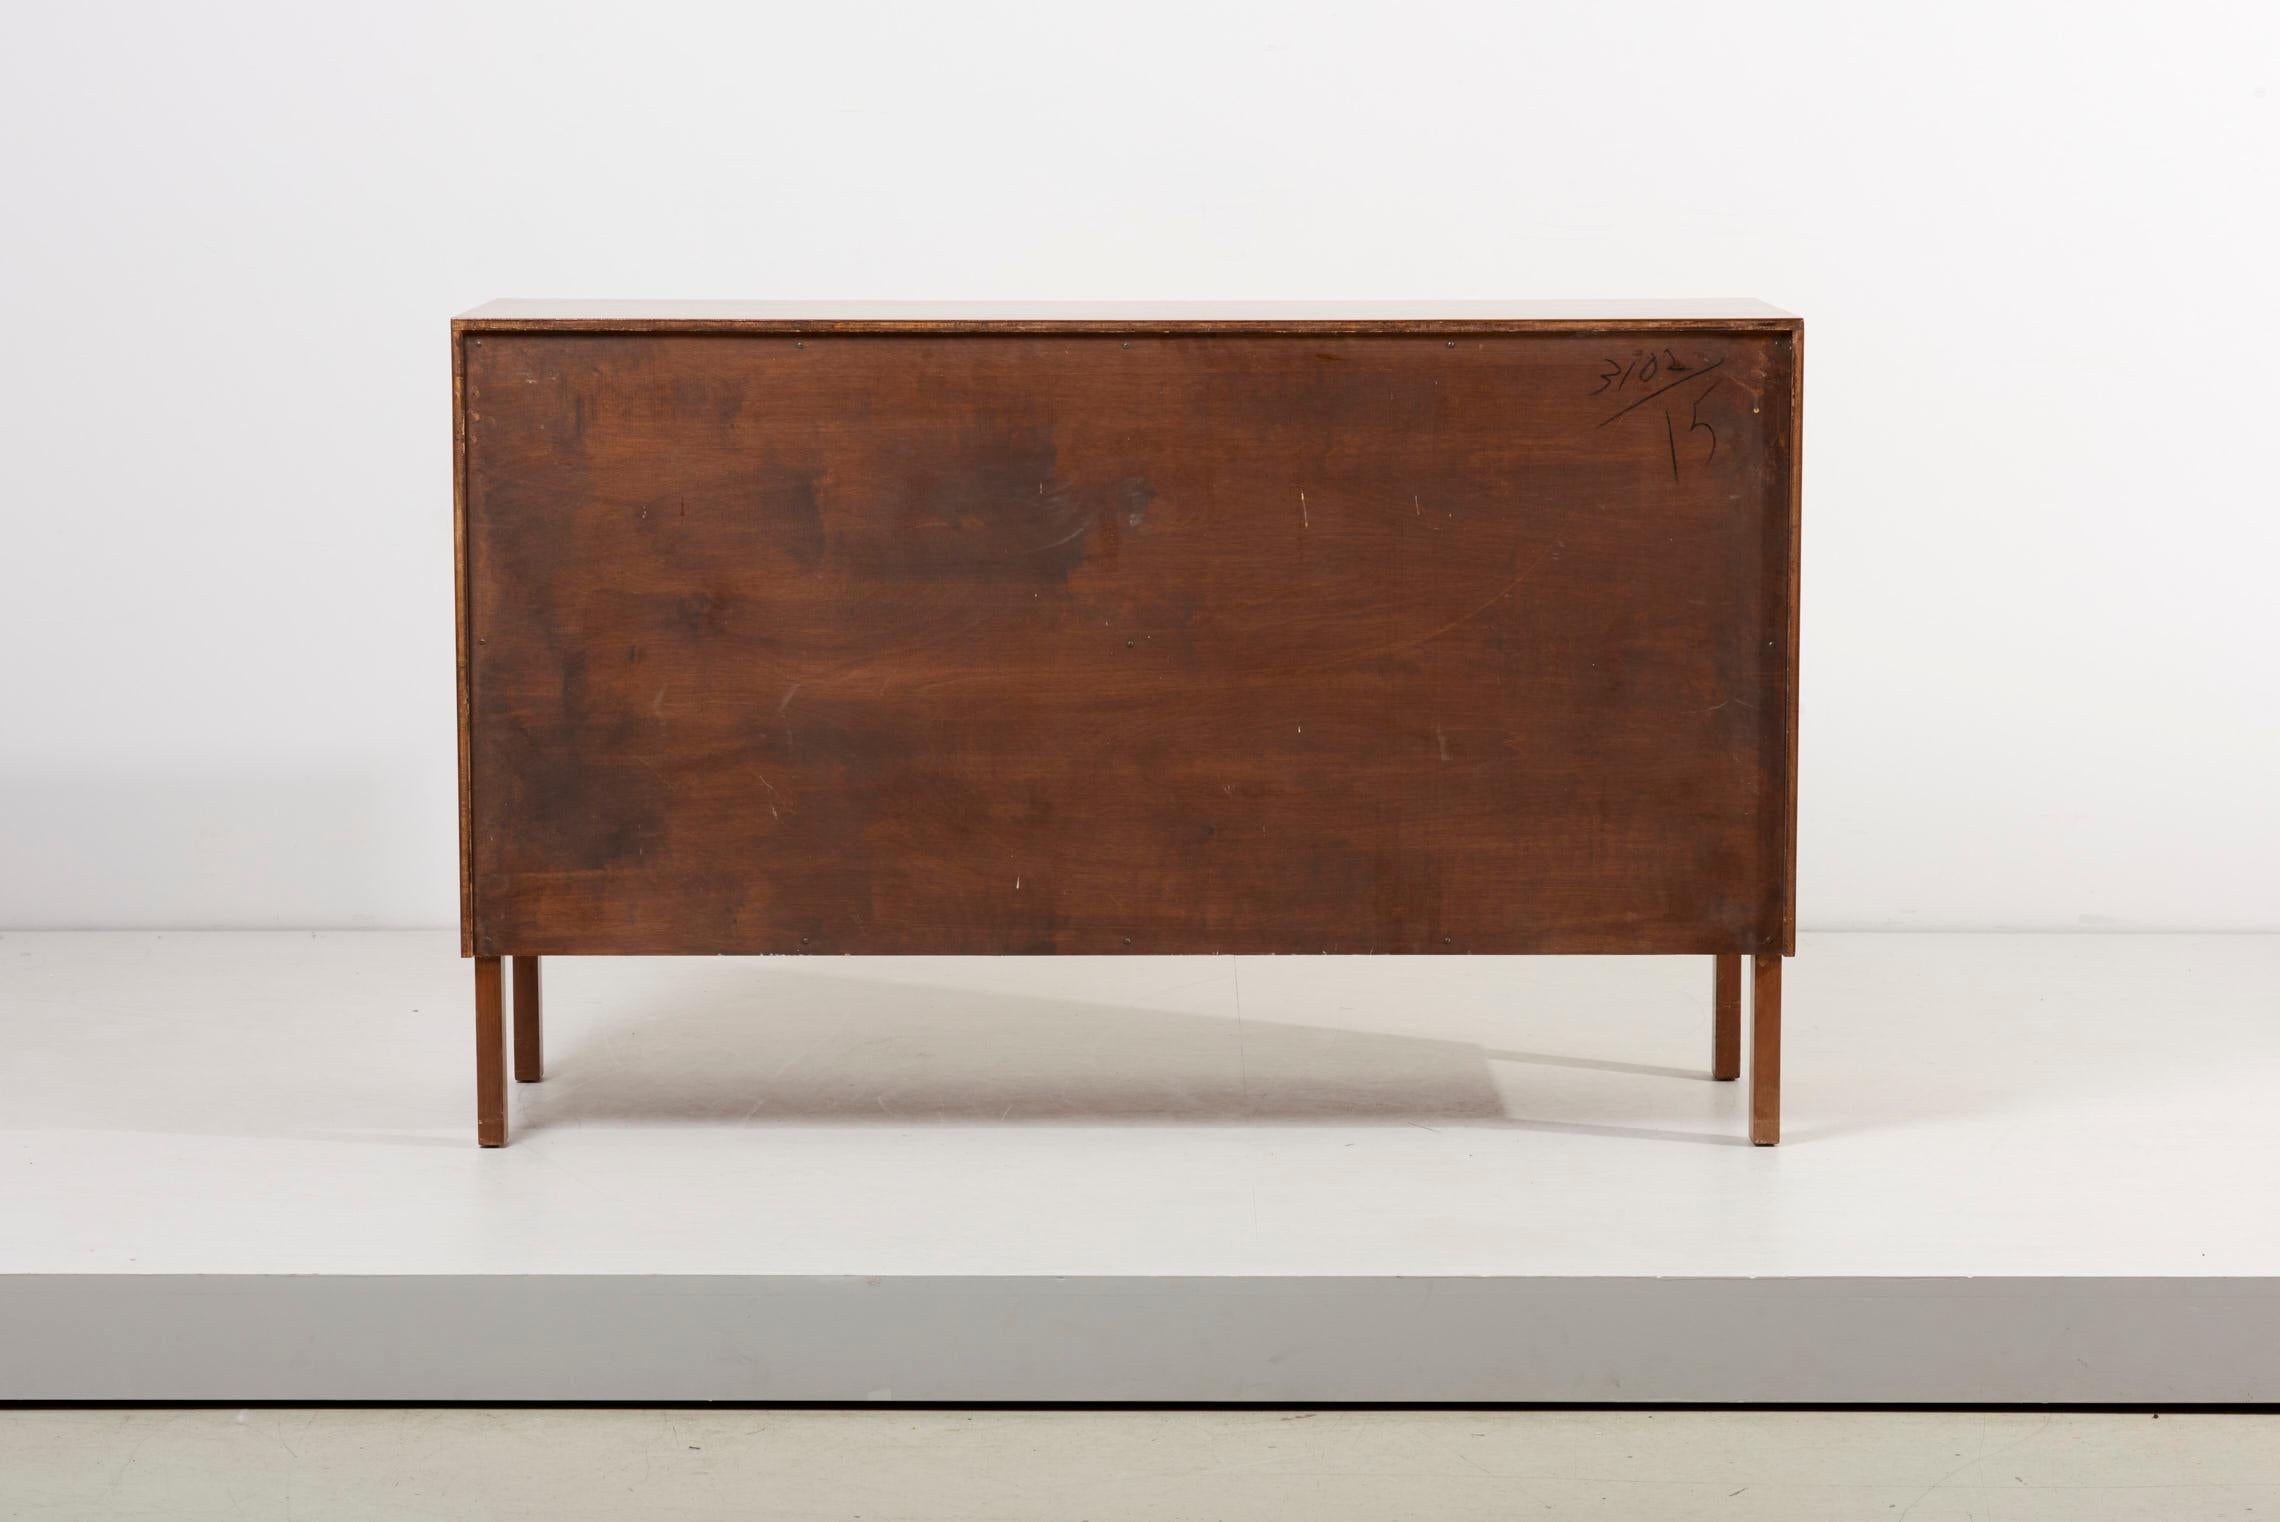 Modernist Sideboard in Walnut by Allan Gould, USA 1960s For Sale 1